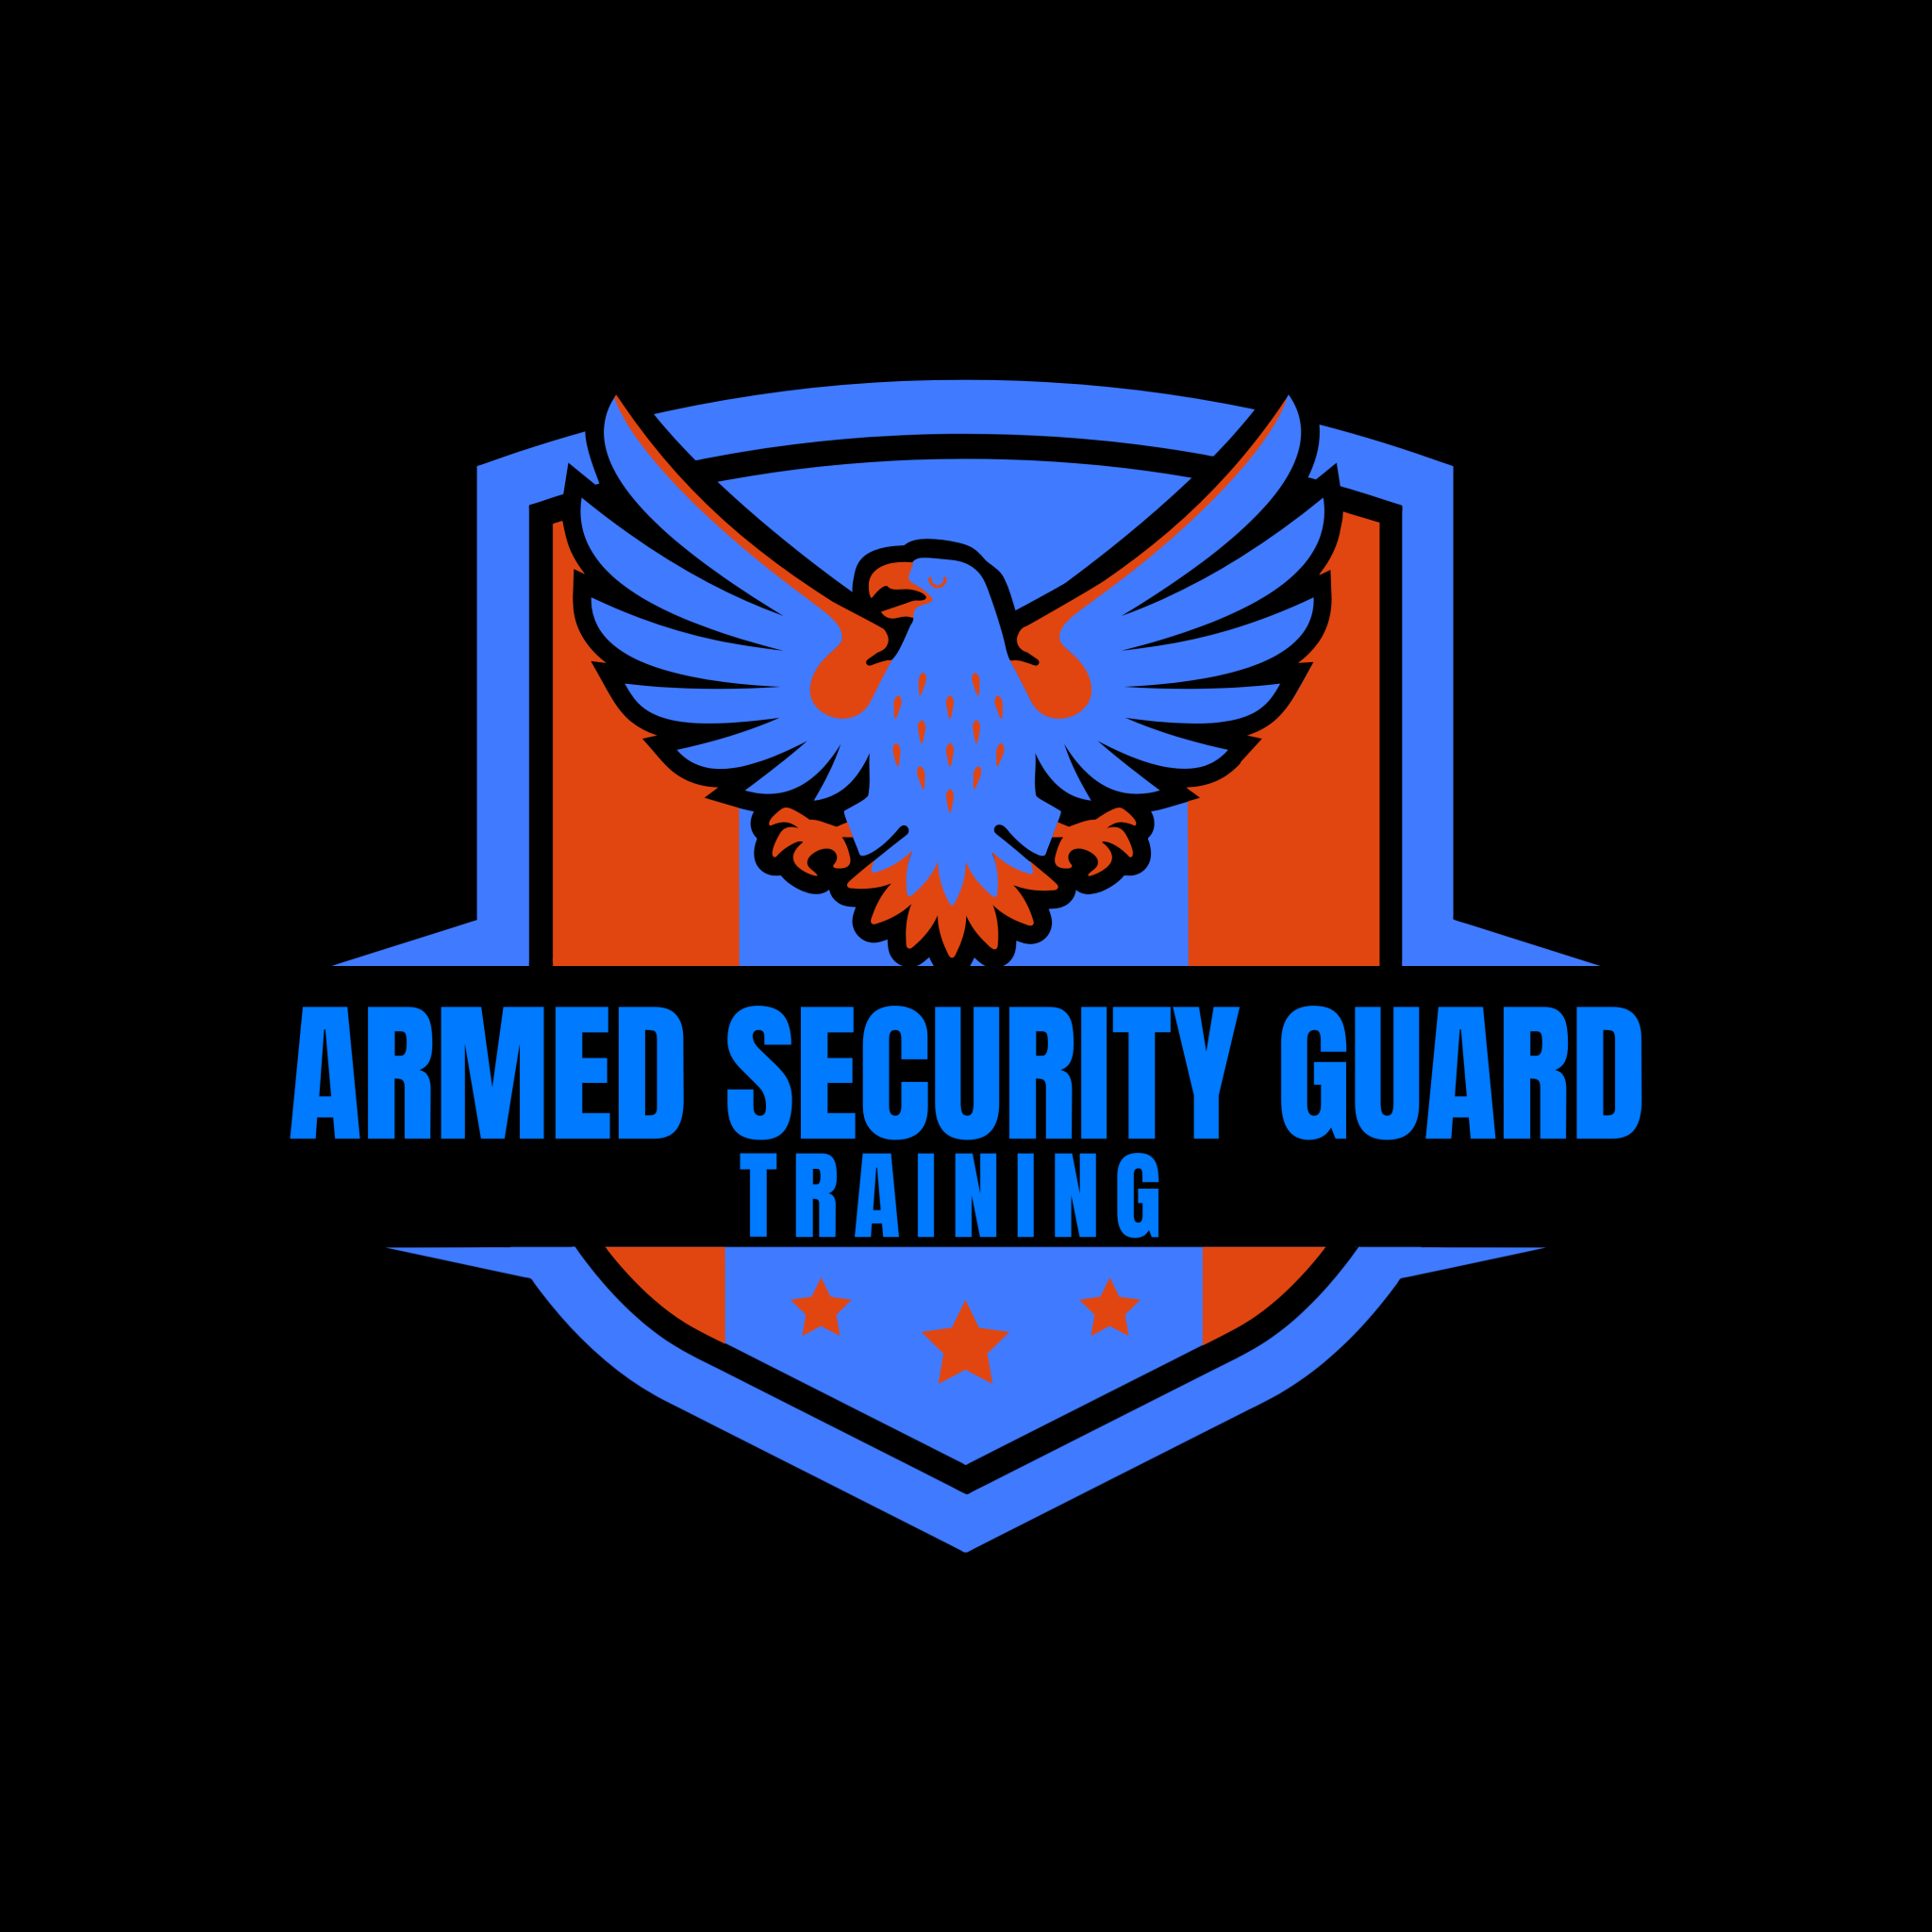 Armed Security Guard Certification $159 TRAINED READY ARMED